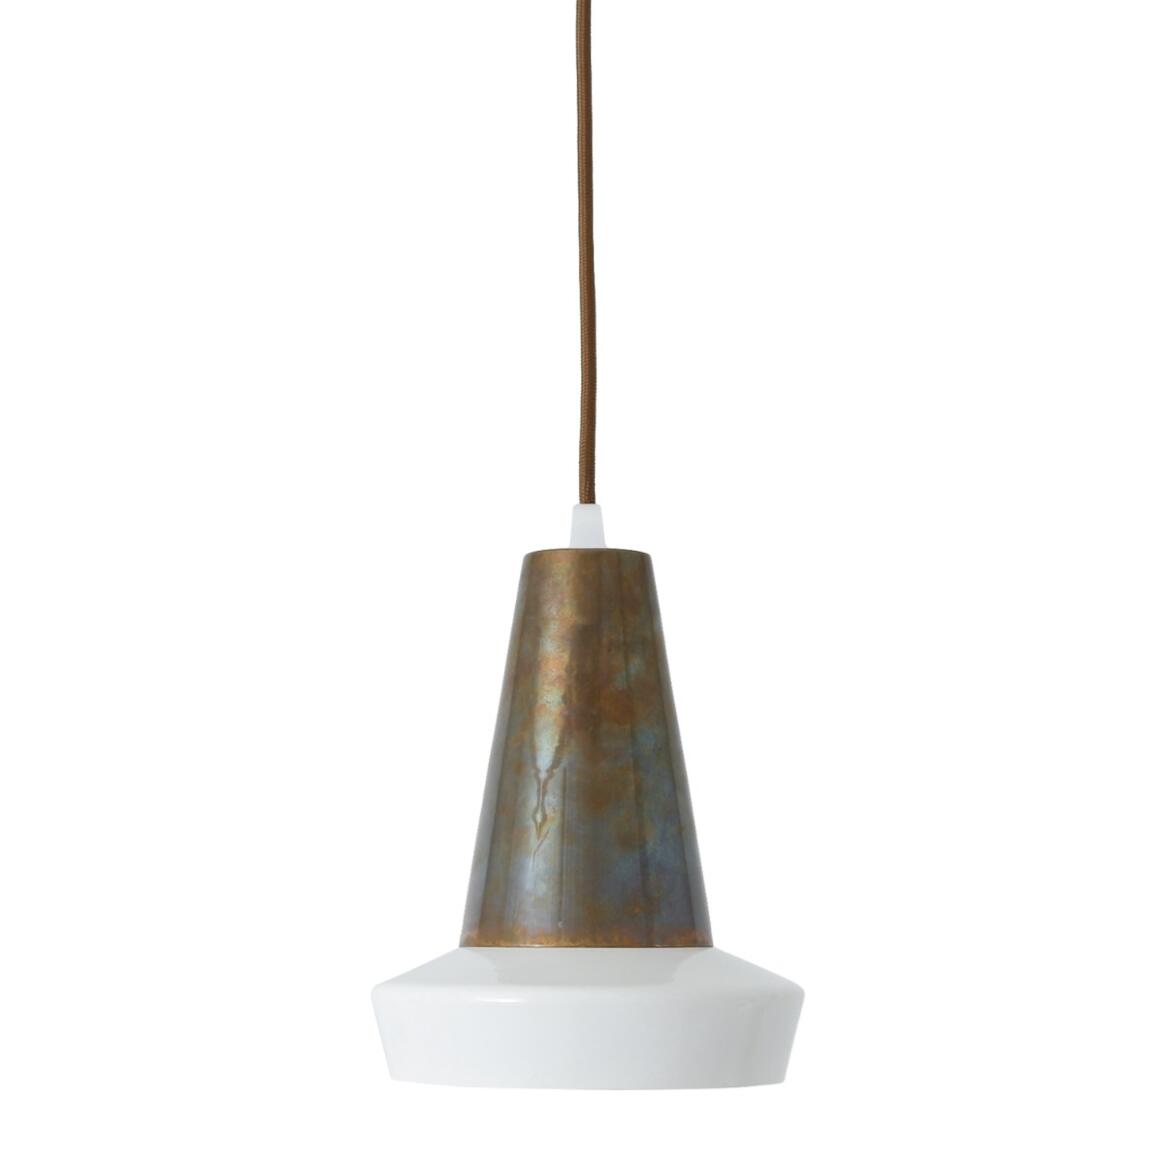 Malabo White and Antique Brass Pendant Light 6.3" main product image